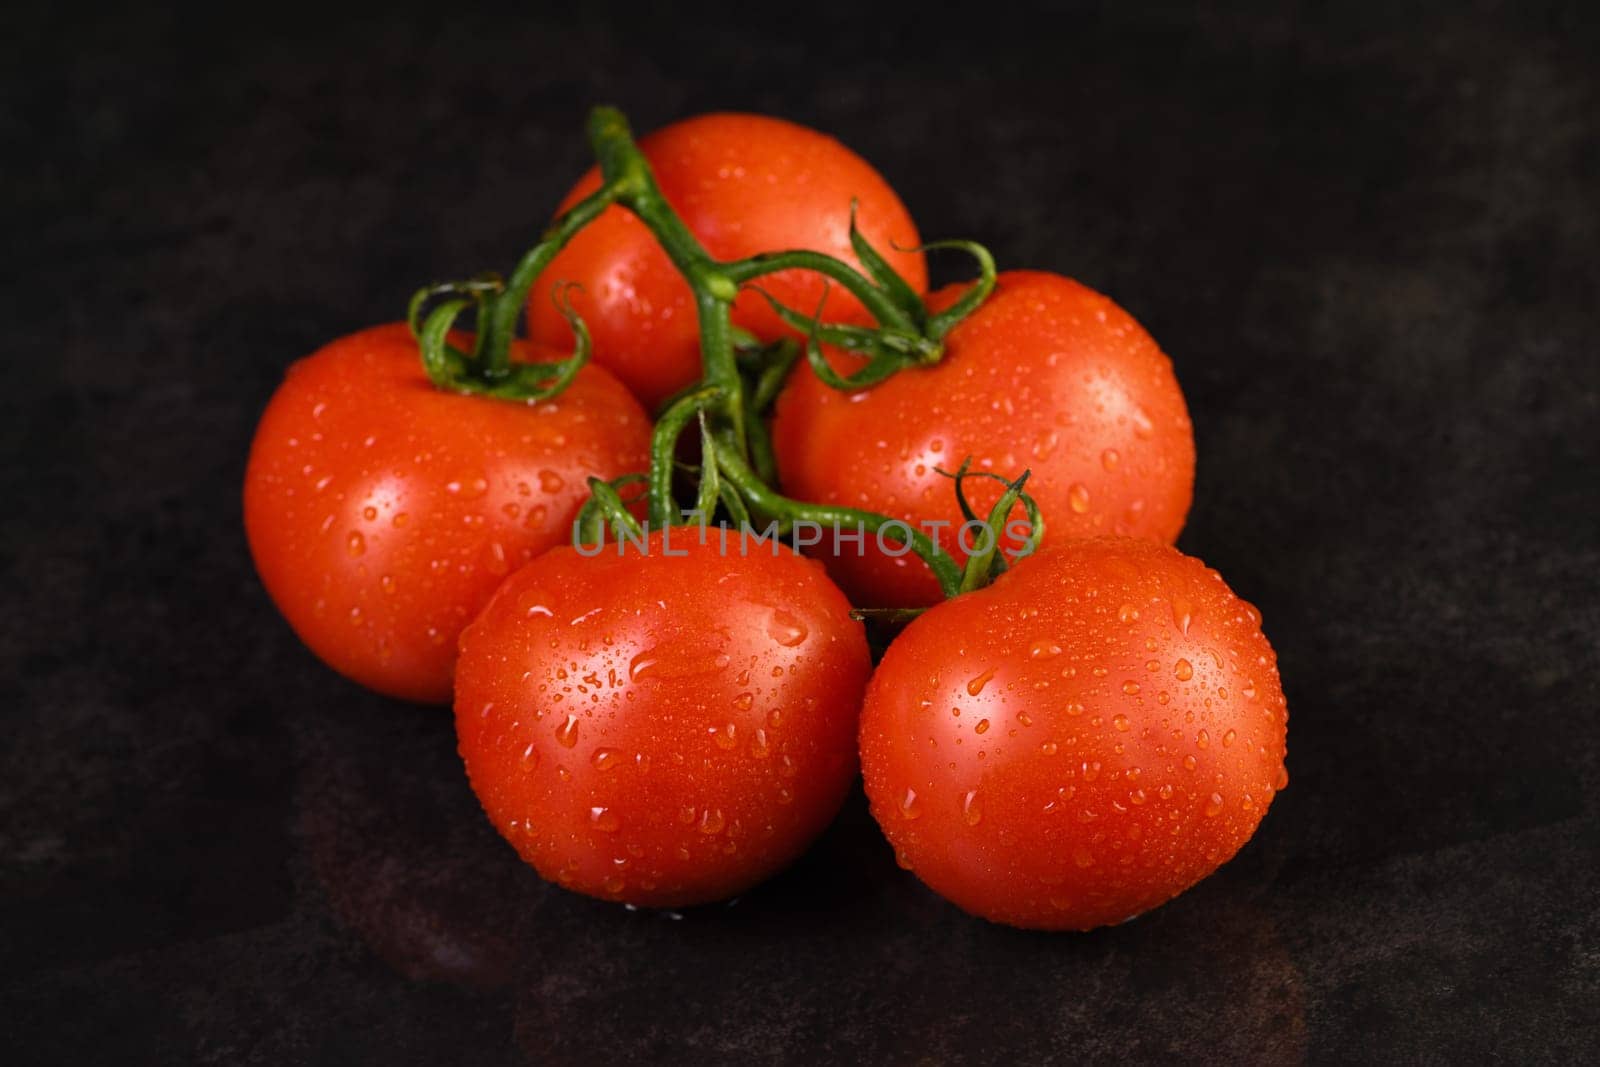 Fresh ripe red tomato branch with water drops on a dark background . Close-up. Horizontal photo. Poster for vegetable market or shop.